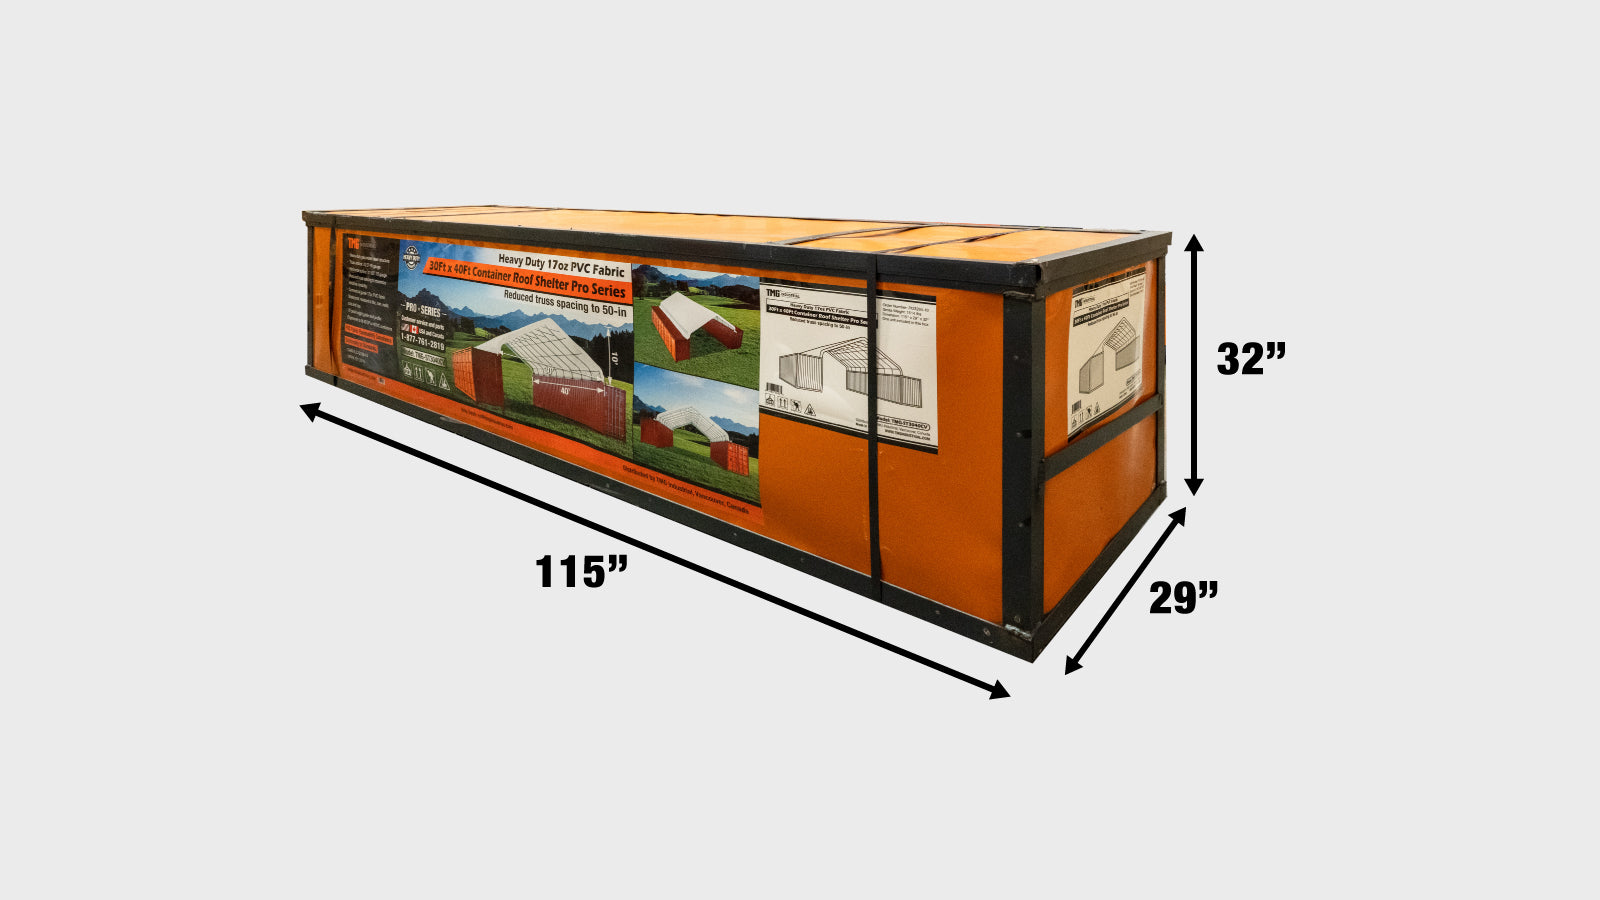 TMG Industrial 30' x 40' PVC Fabric Container Peak Roof Shelter Pro Series, Fire Retardant, Water Resistant, UV Protected, TMG-ST3041CV (Previously ST3040CV)-shipping-info-image